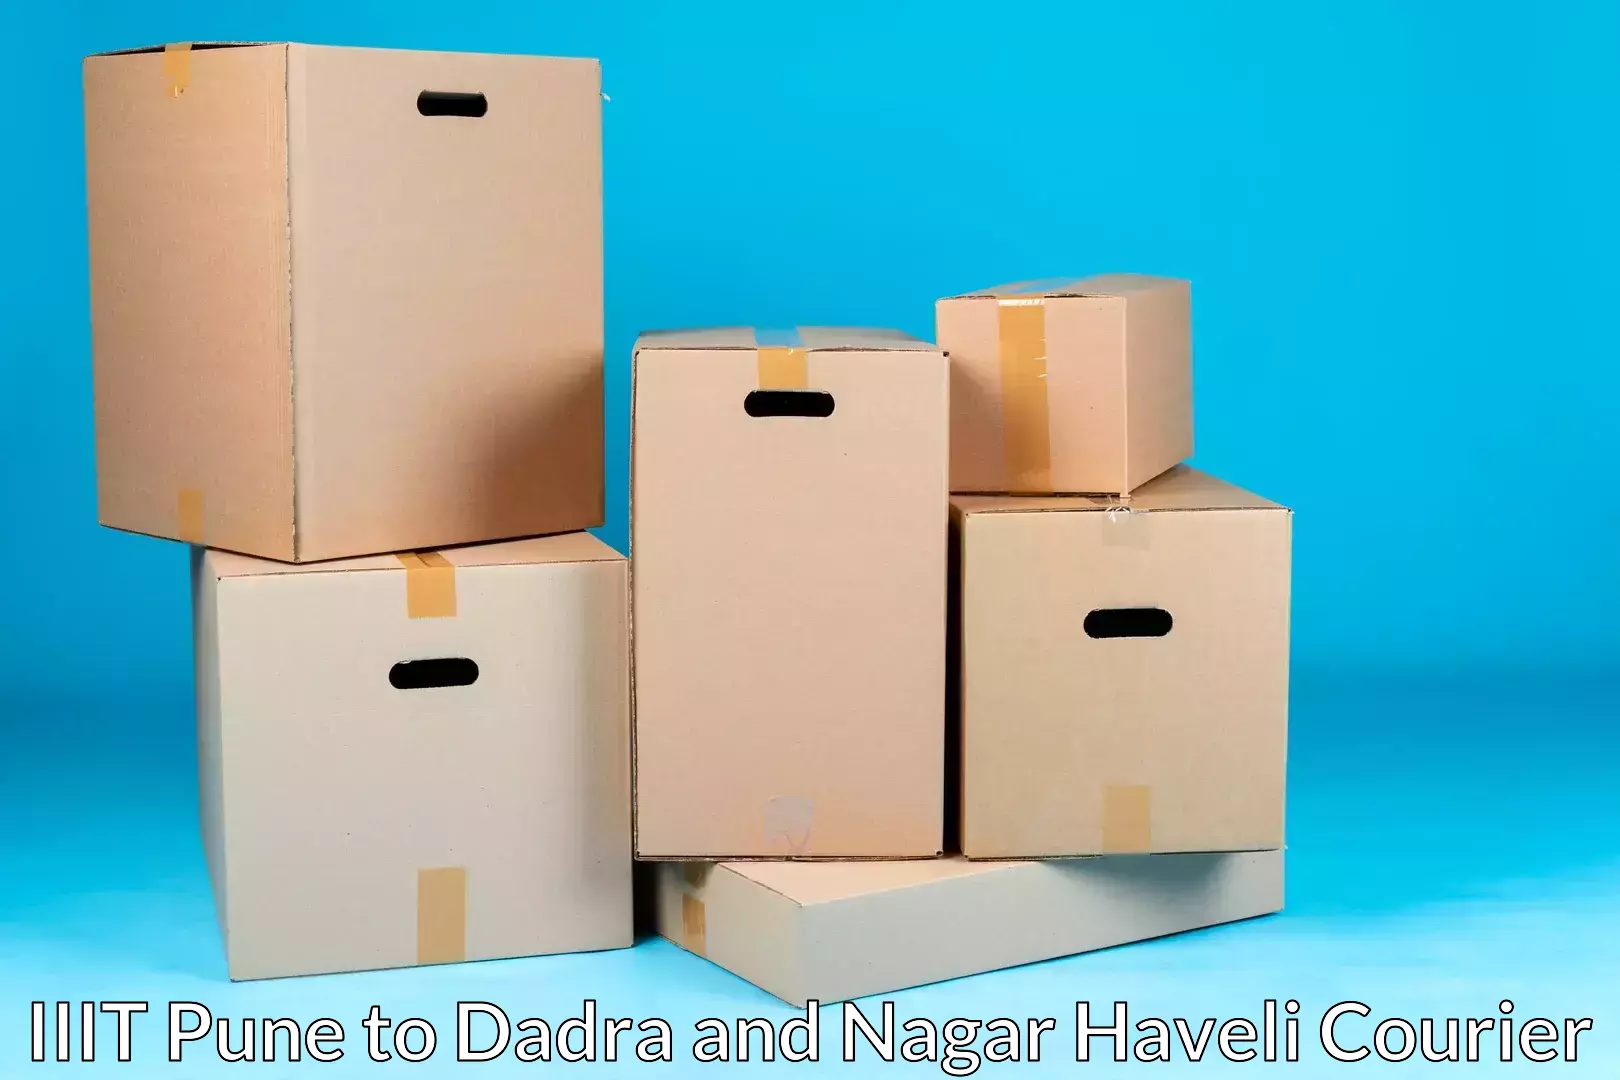 Furniture transport specialists IIIT Pune to Dadra and Nagar Haveli